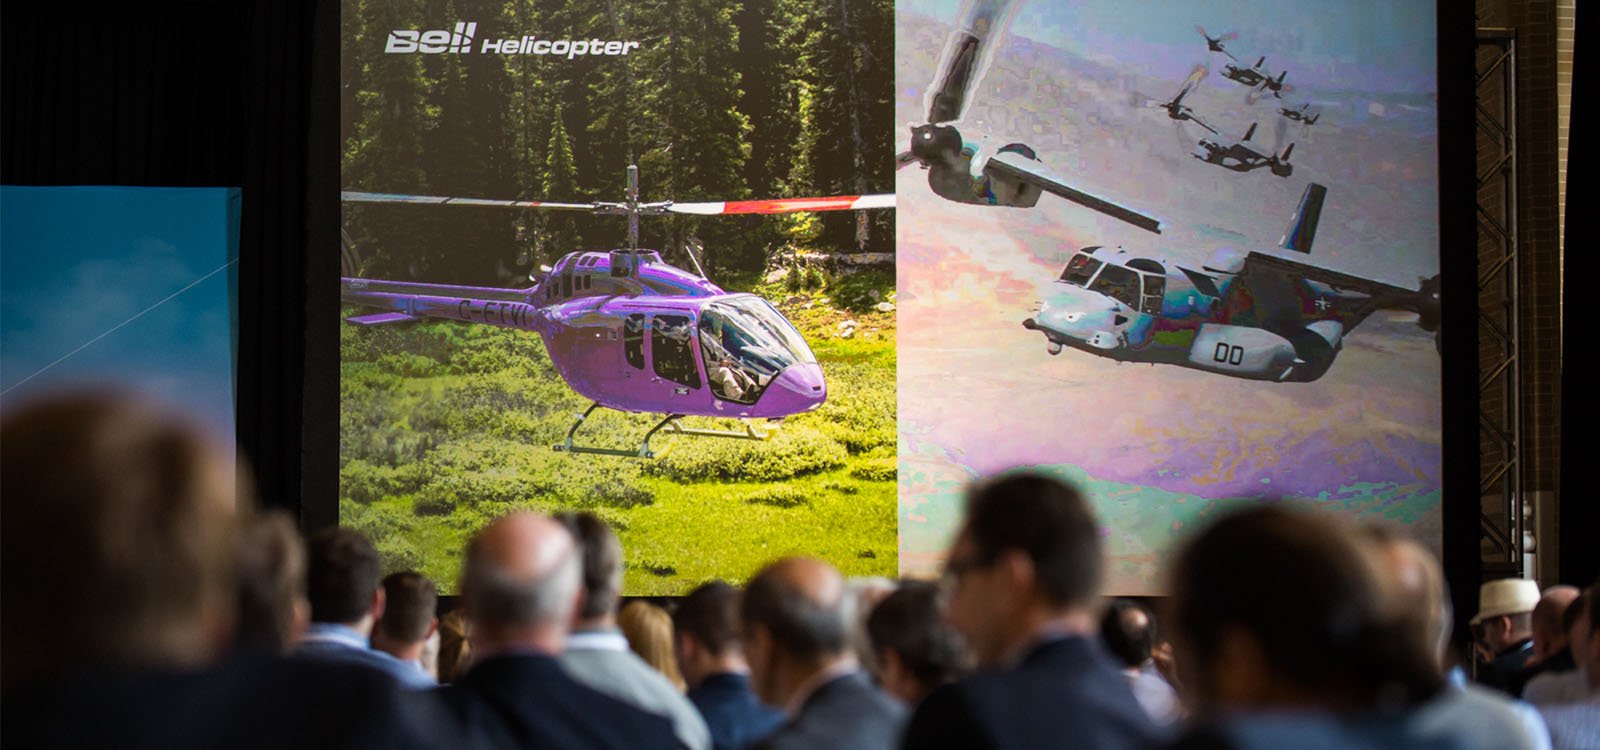 Bell Helicopter and other aircraft companies working towards an electric vertical takeoff and landing solution to fulfill Uber's mission